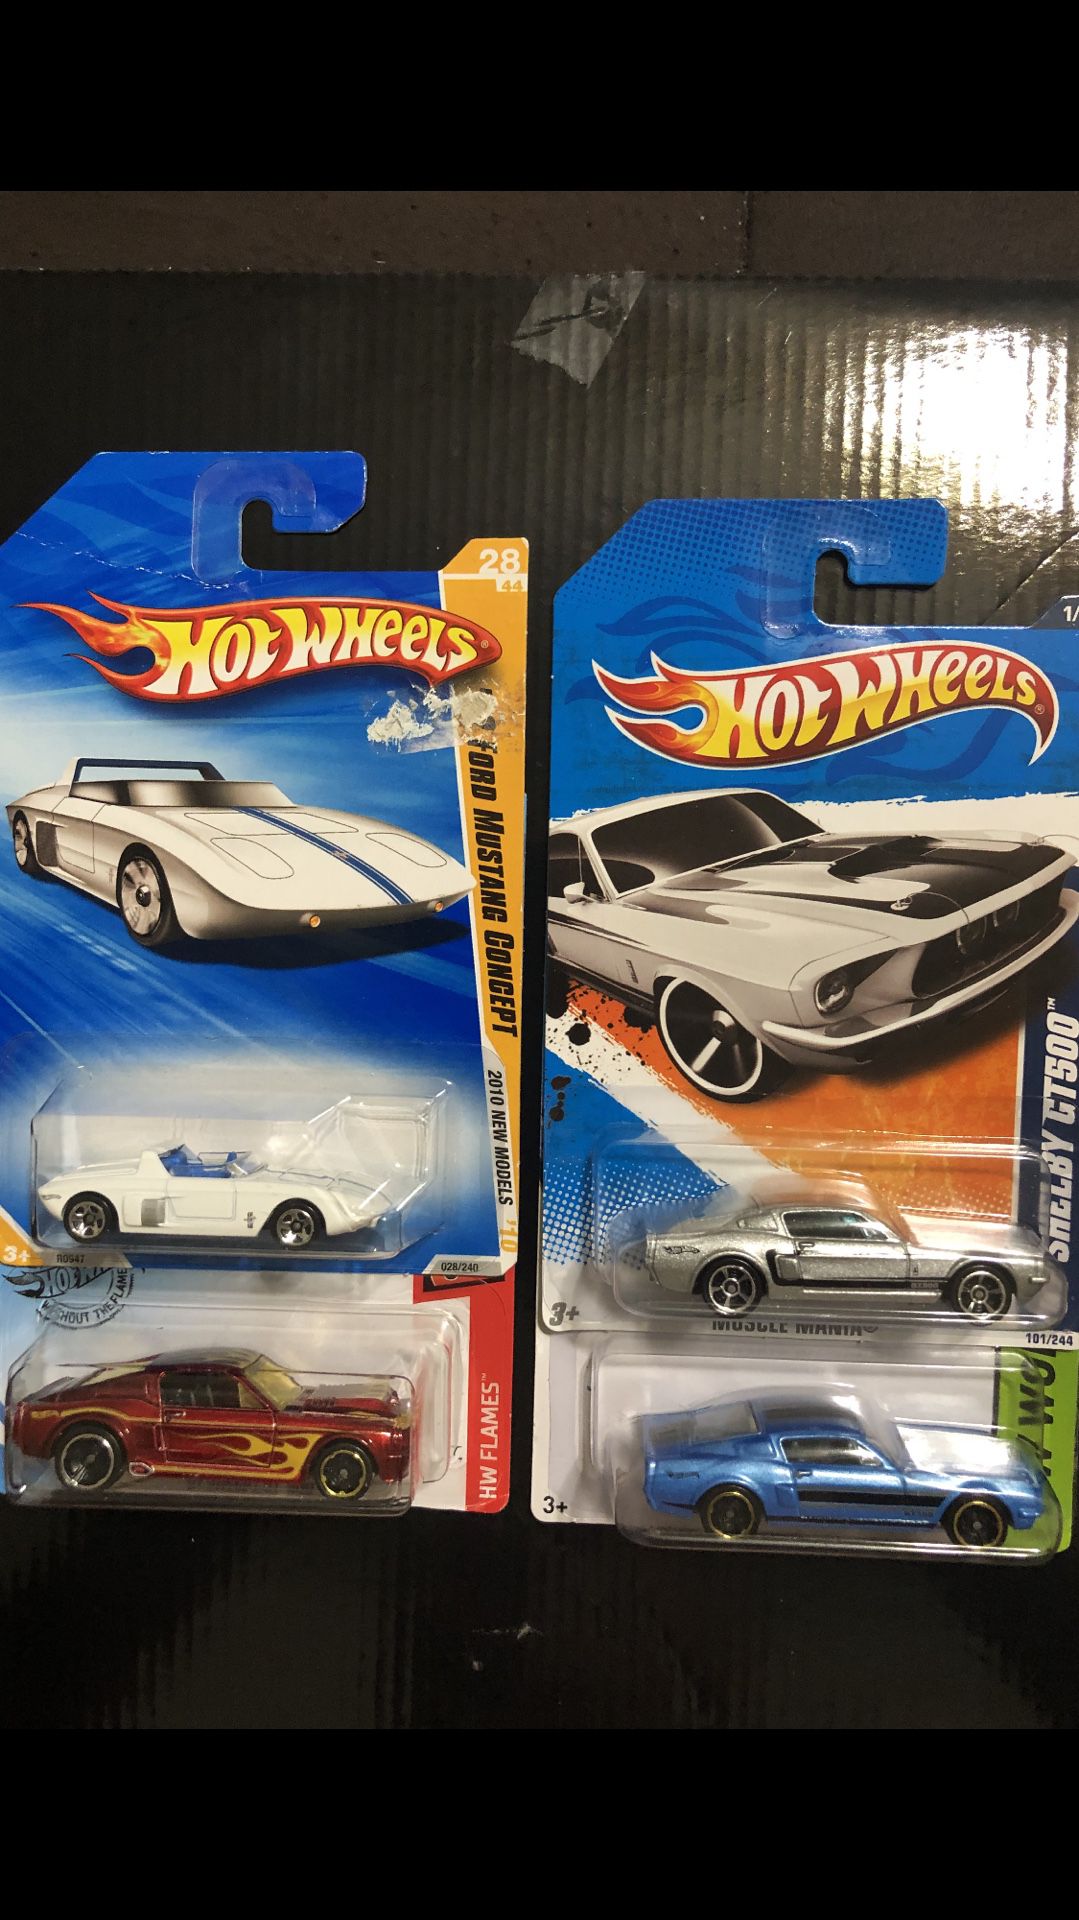 Hot Wheels Shelby GT500’s & Concept Car (set of 4)